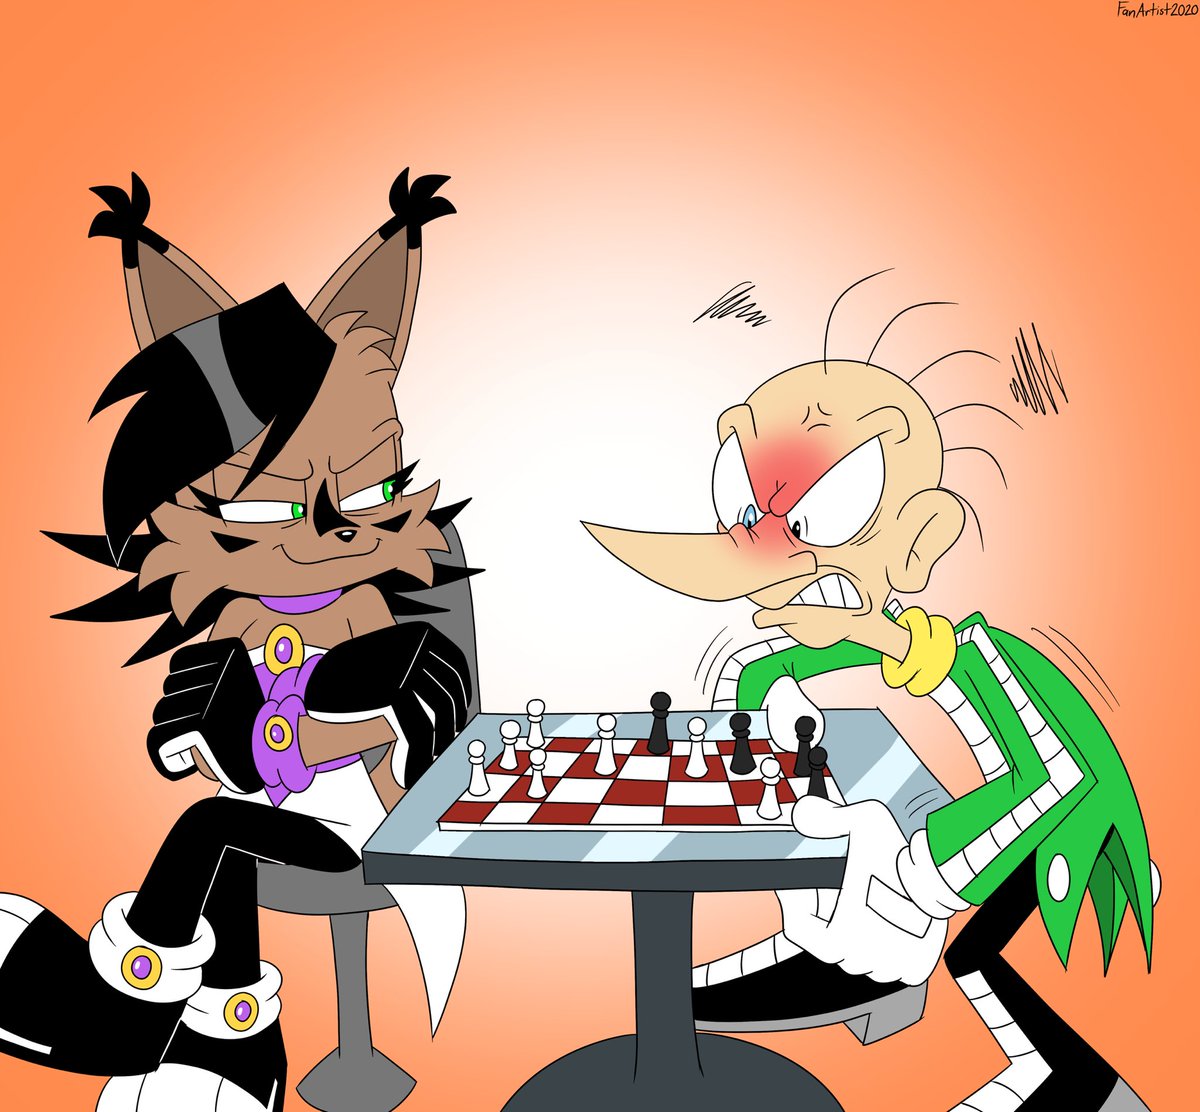 Nicole’s smugness is at an all time high 😏

#SonicTheHedgehog #ArchieSonic #nicolethehololynx #snively #snivelyrobotnik